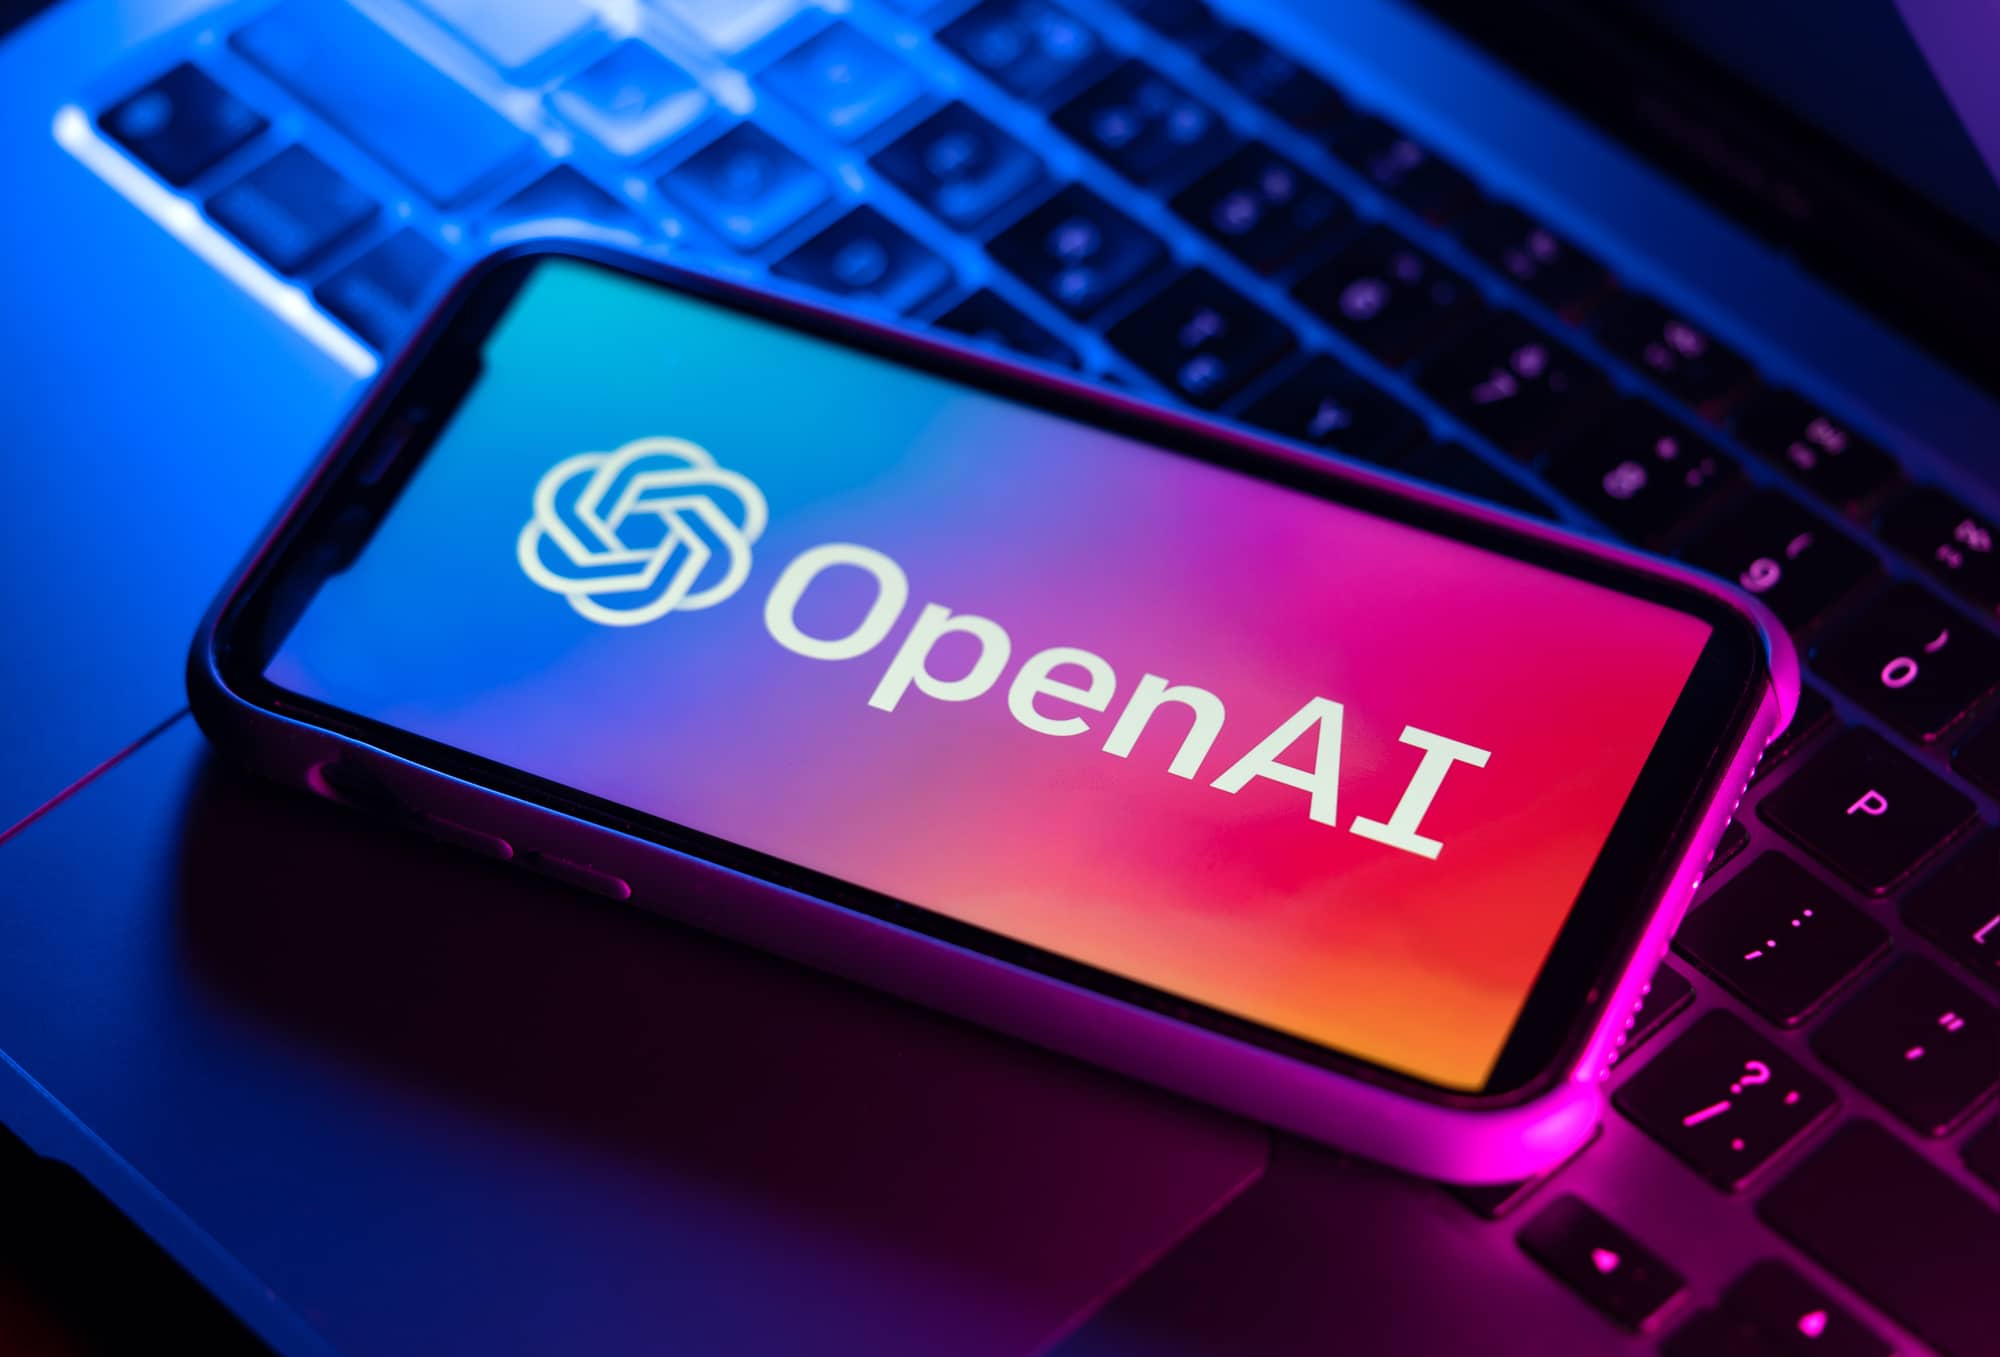 Smartphone with OpenAI logo displayed on the screen, placed on a laptop keyboard with purple backlighting, symbolizing advanced AI technology such as voice engine capabilities.